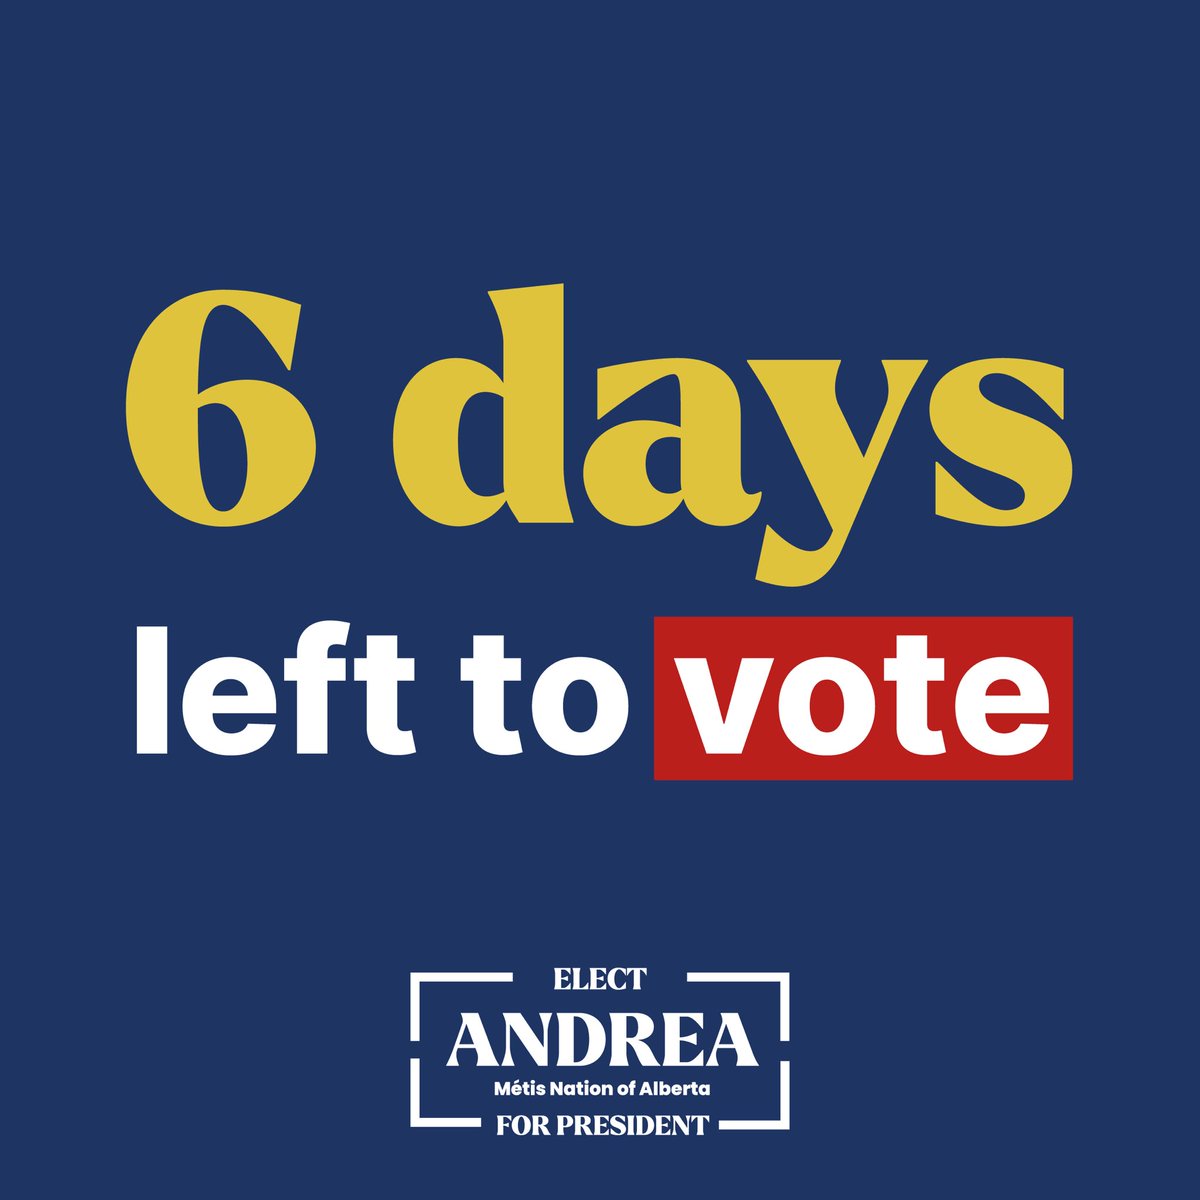 There are 6 days left to vote in the Otipemisiwak Métis Government election! This is a critical moment in our Nation’s history. It’s important that you make your voice heard.   Learn more about how to vote by visiting: metiselectionsab.com   Let’s move forward together.